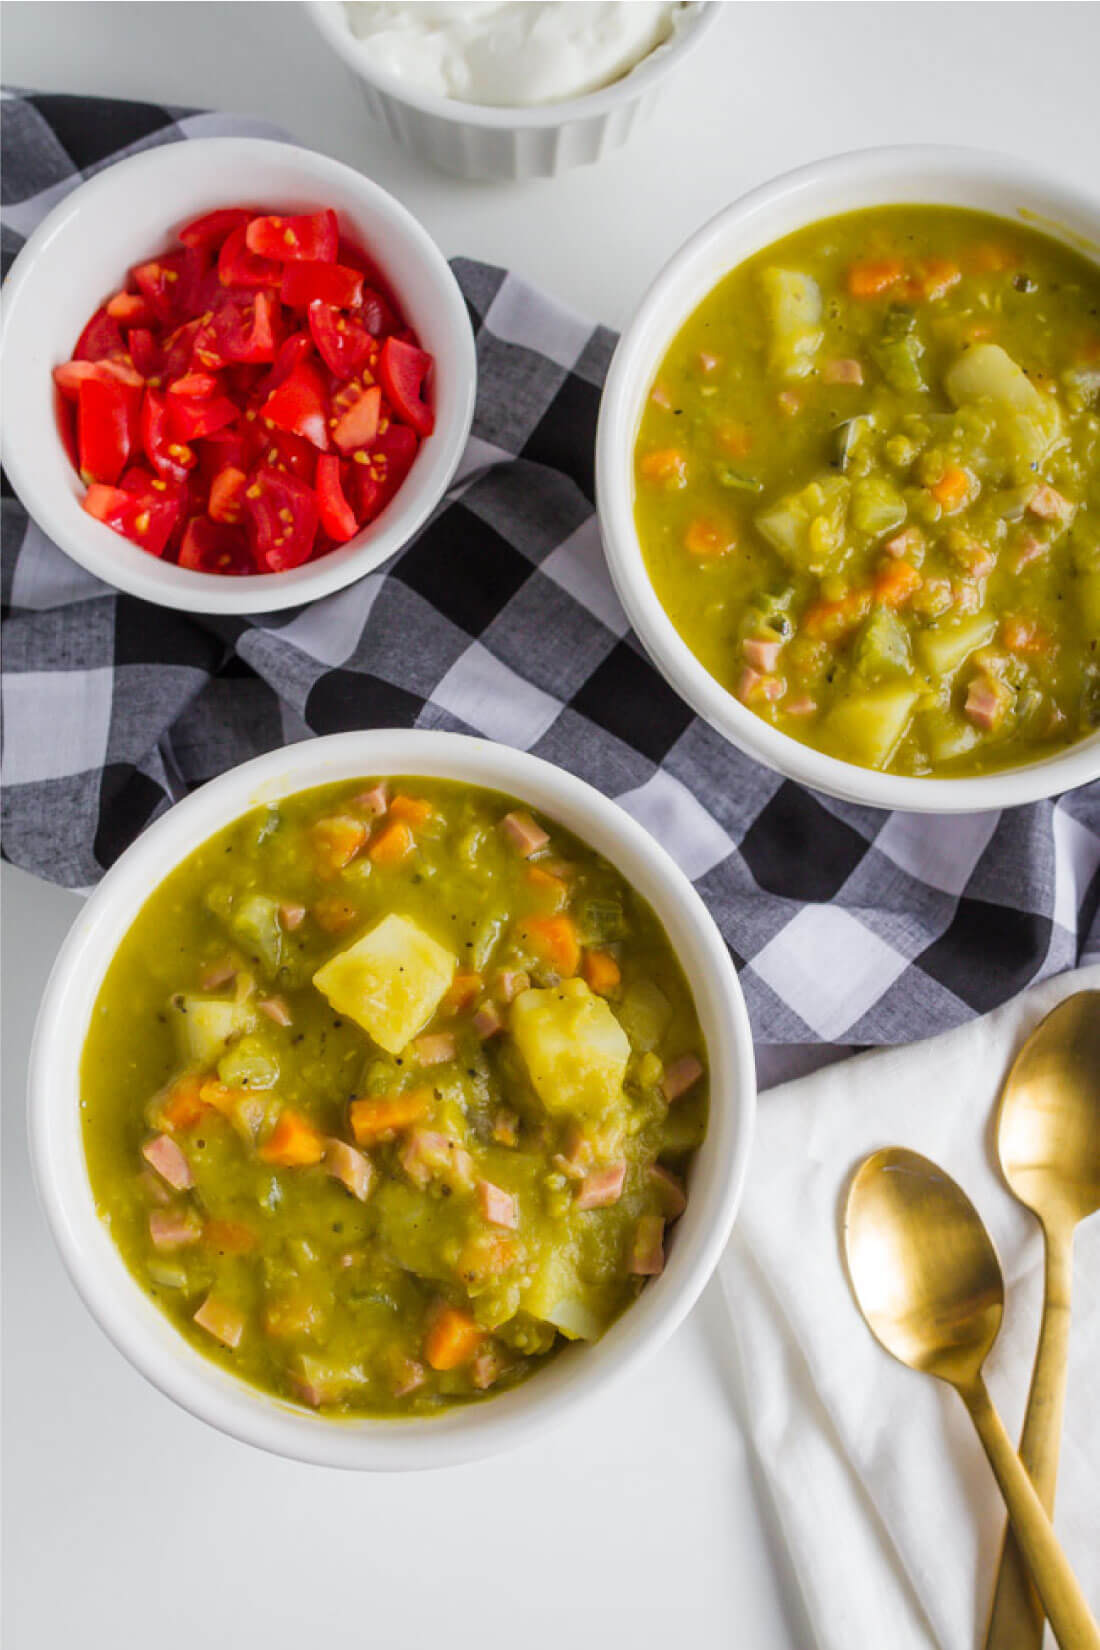 Split Pea Soup Recipe - don't let this recipe intimidate you! It's so deliciously creamy with tons of flavor from www.thirtyhandmadedays.com